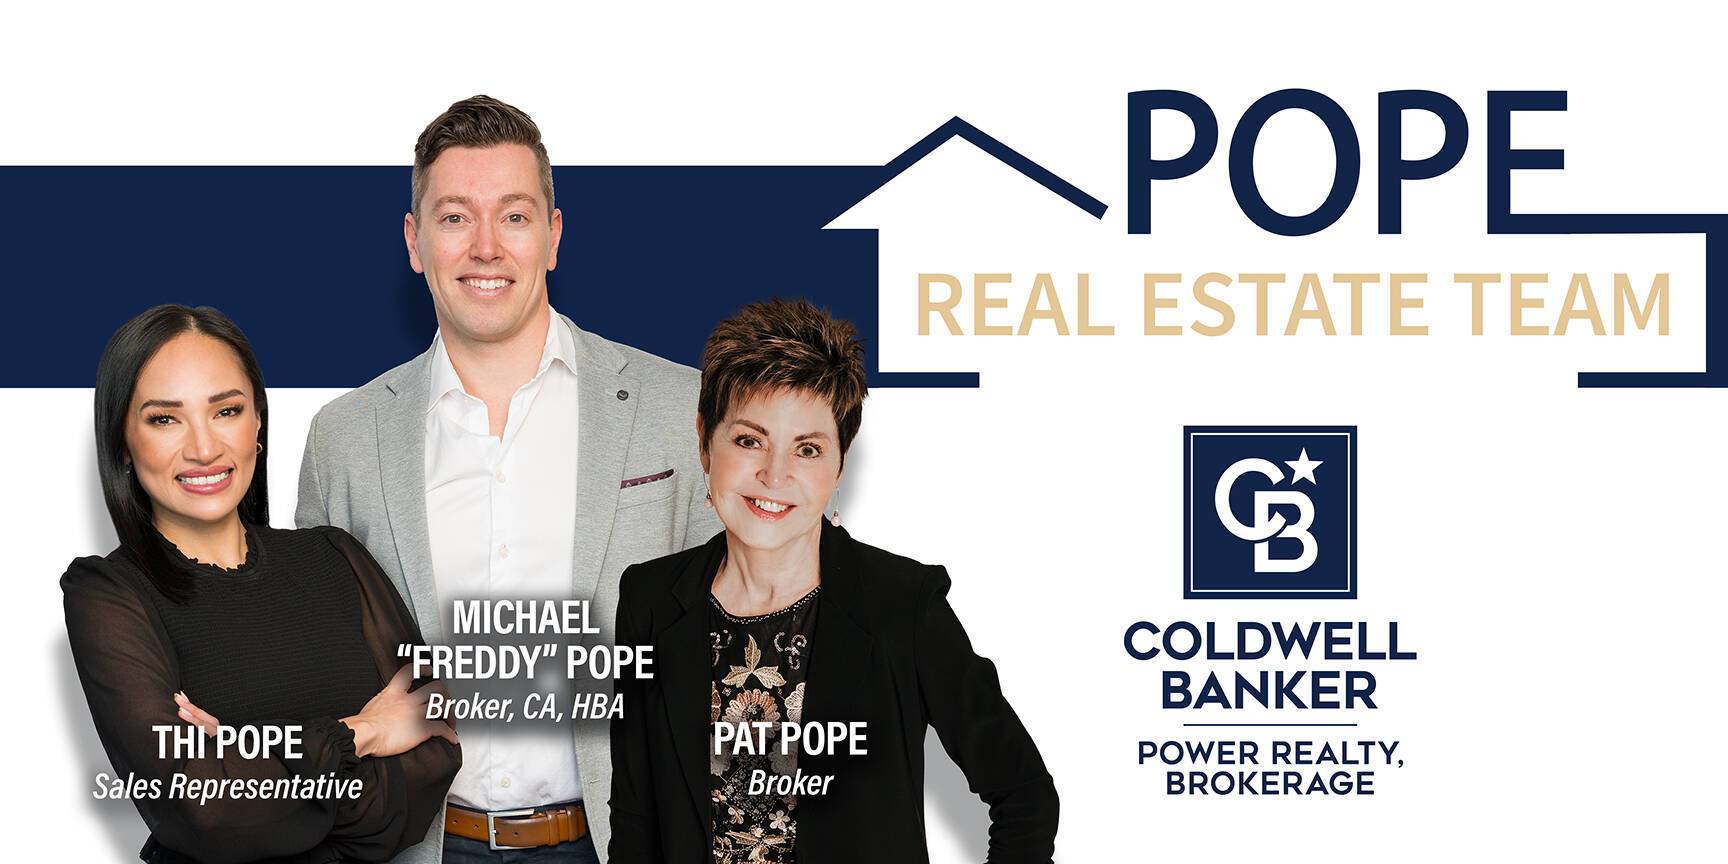 Michael Pope and the Pope Real Estate Team